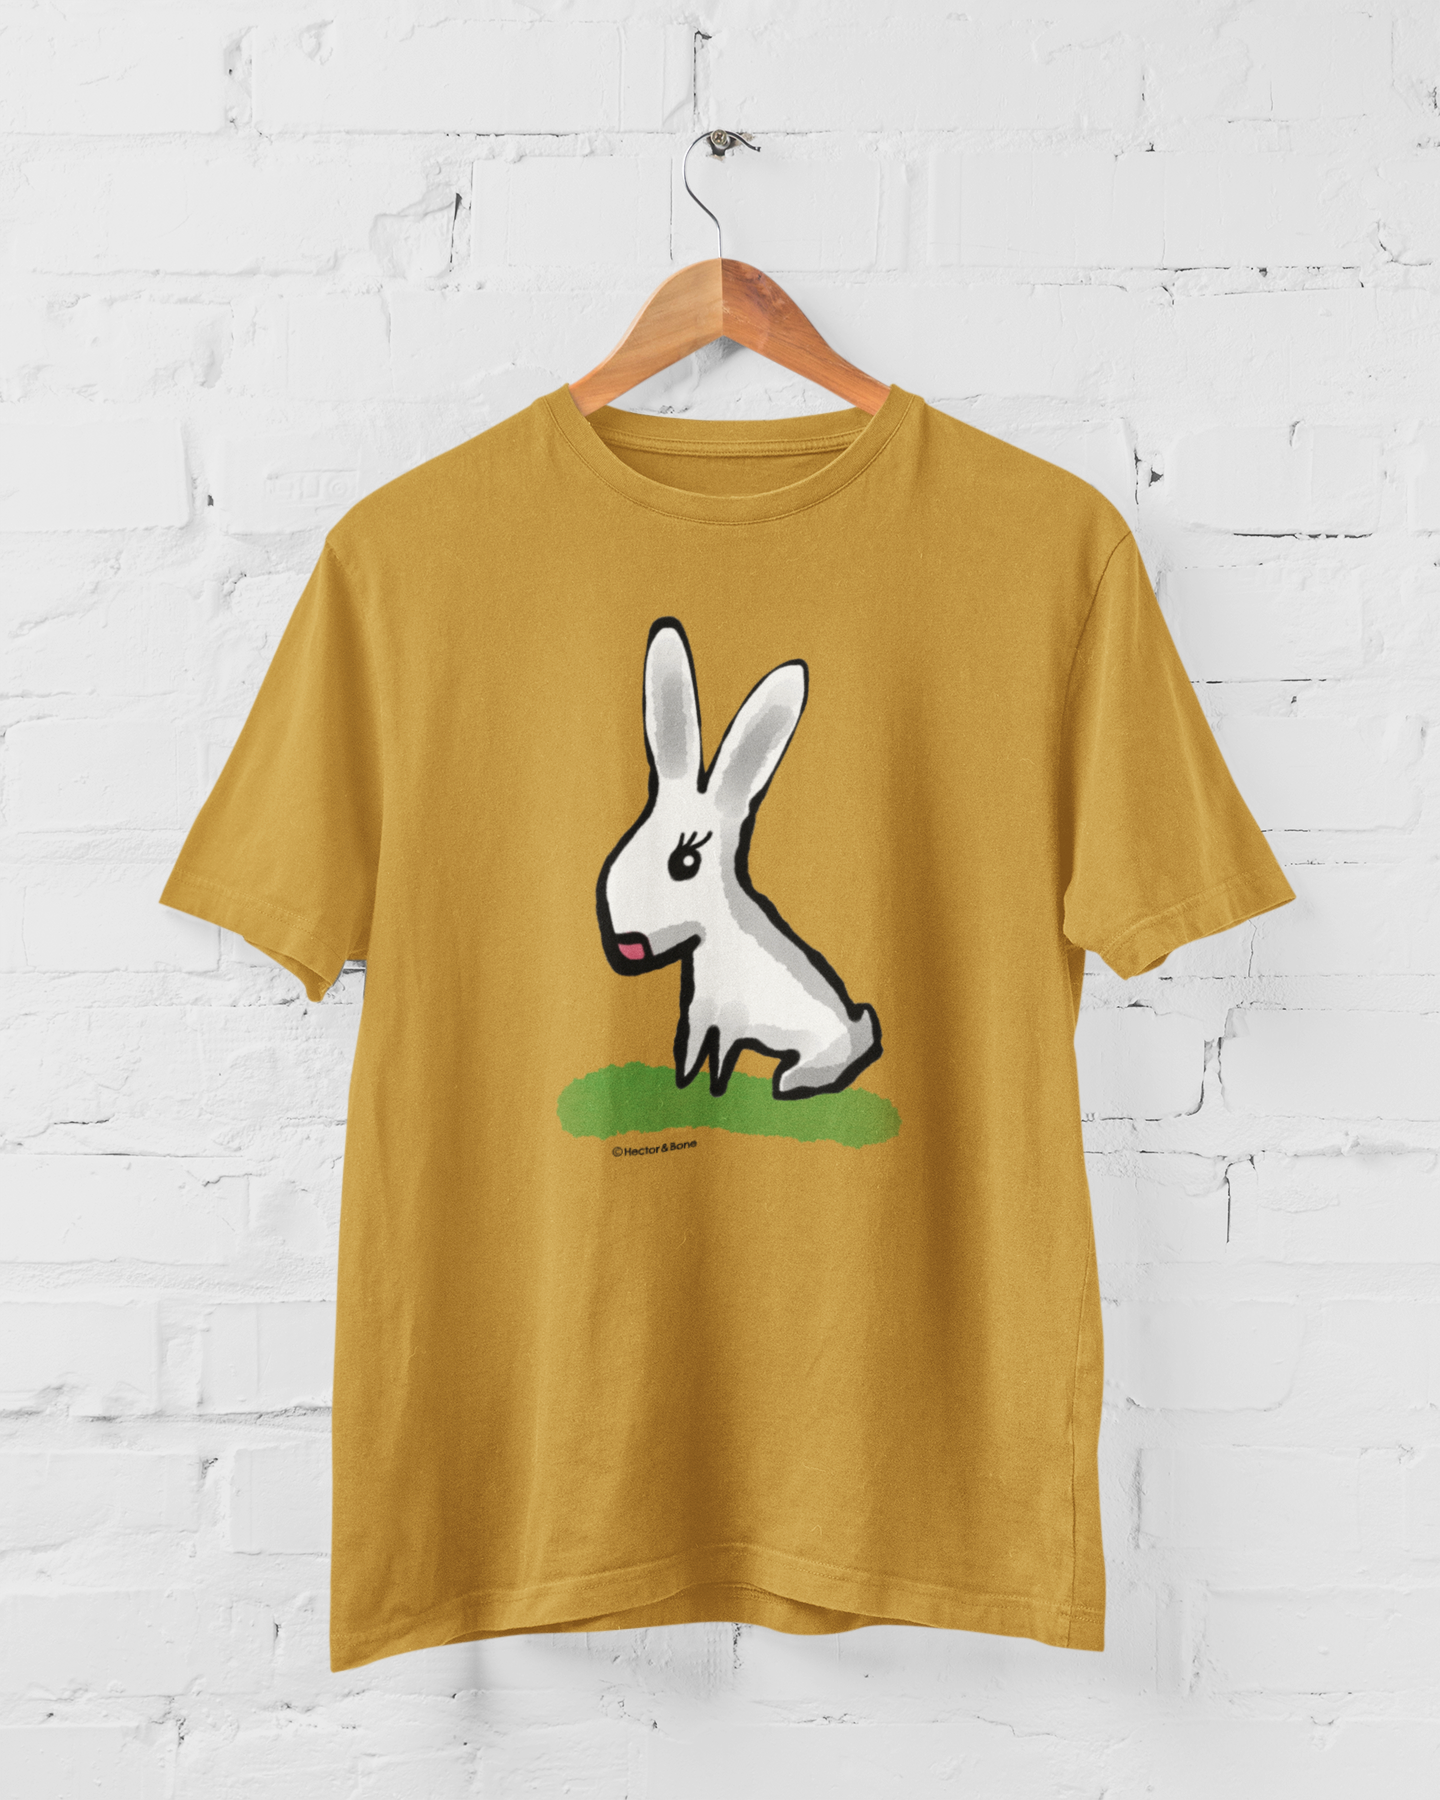 Cute Bunny T-shirt original illustrated design on ochre colour vegan cotton t-shirts by Hector and Bone